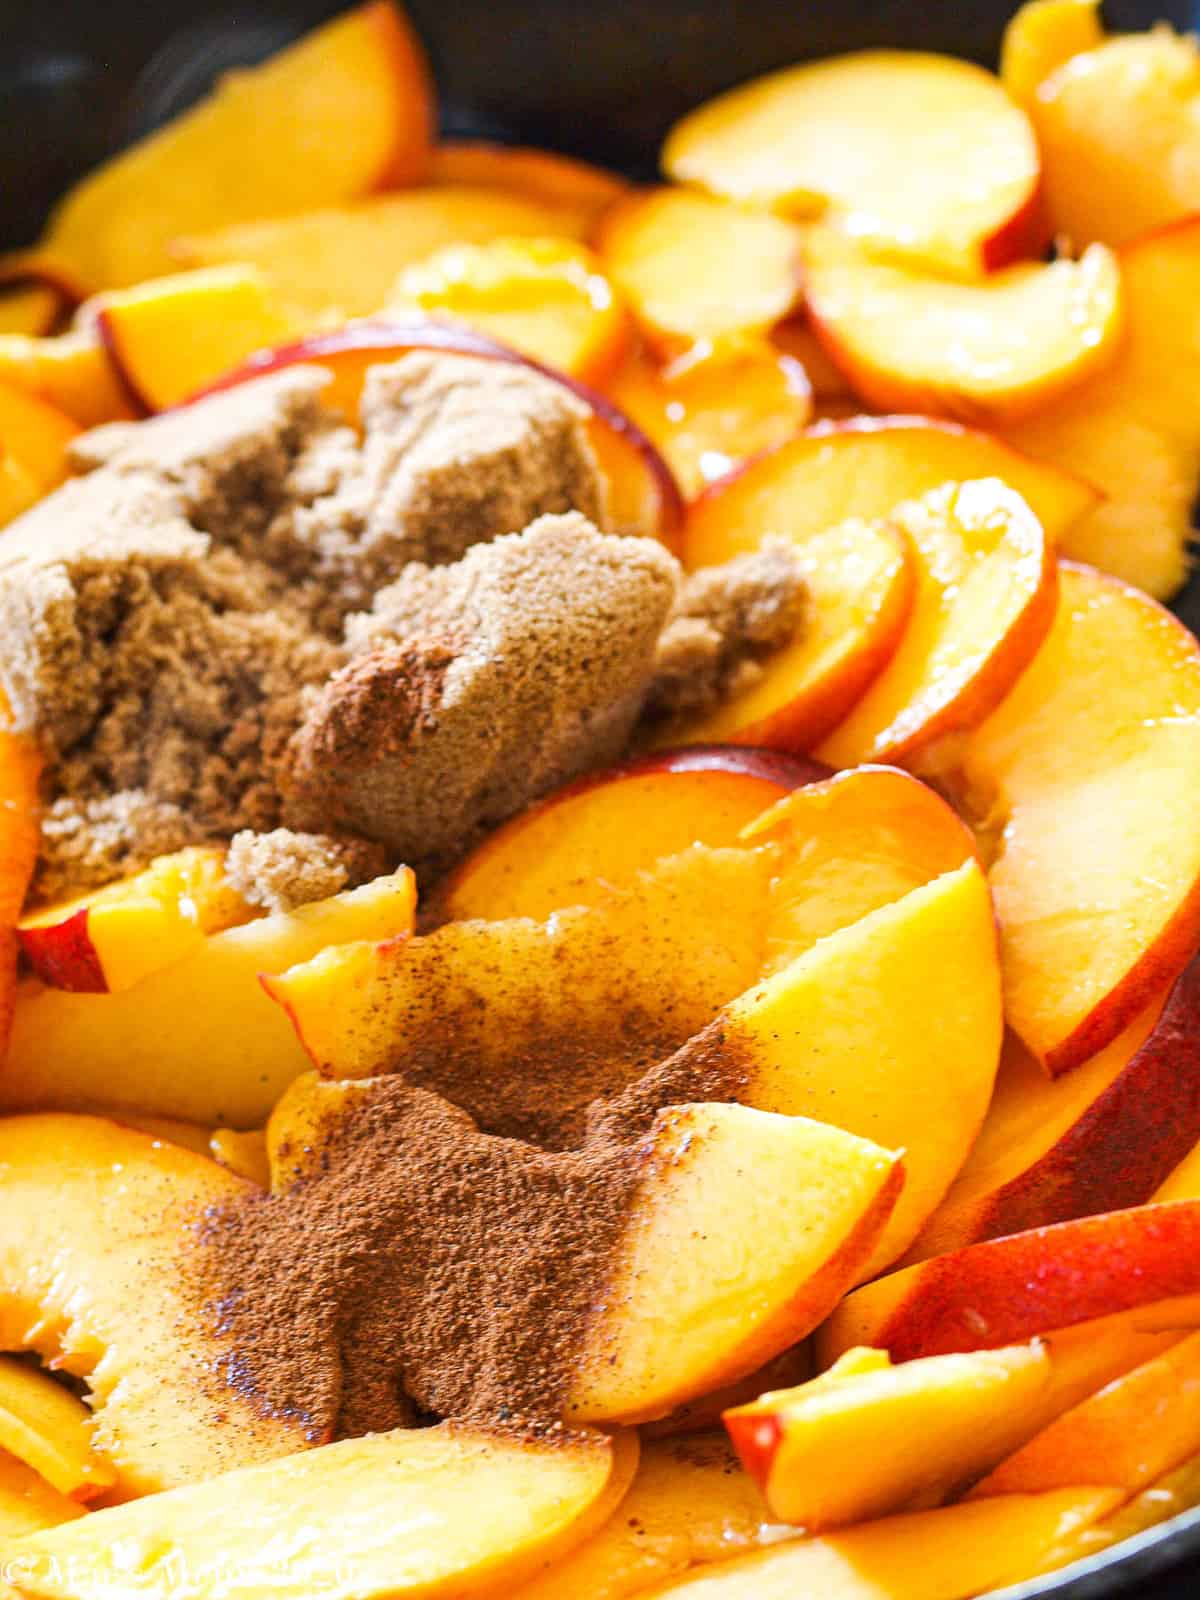 brown sugar and spices on top of peaches